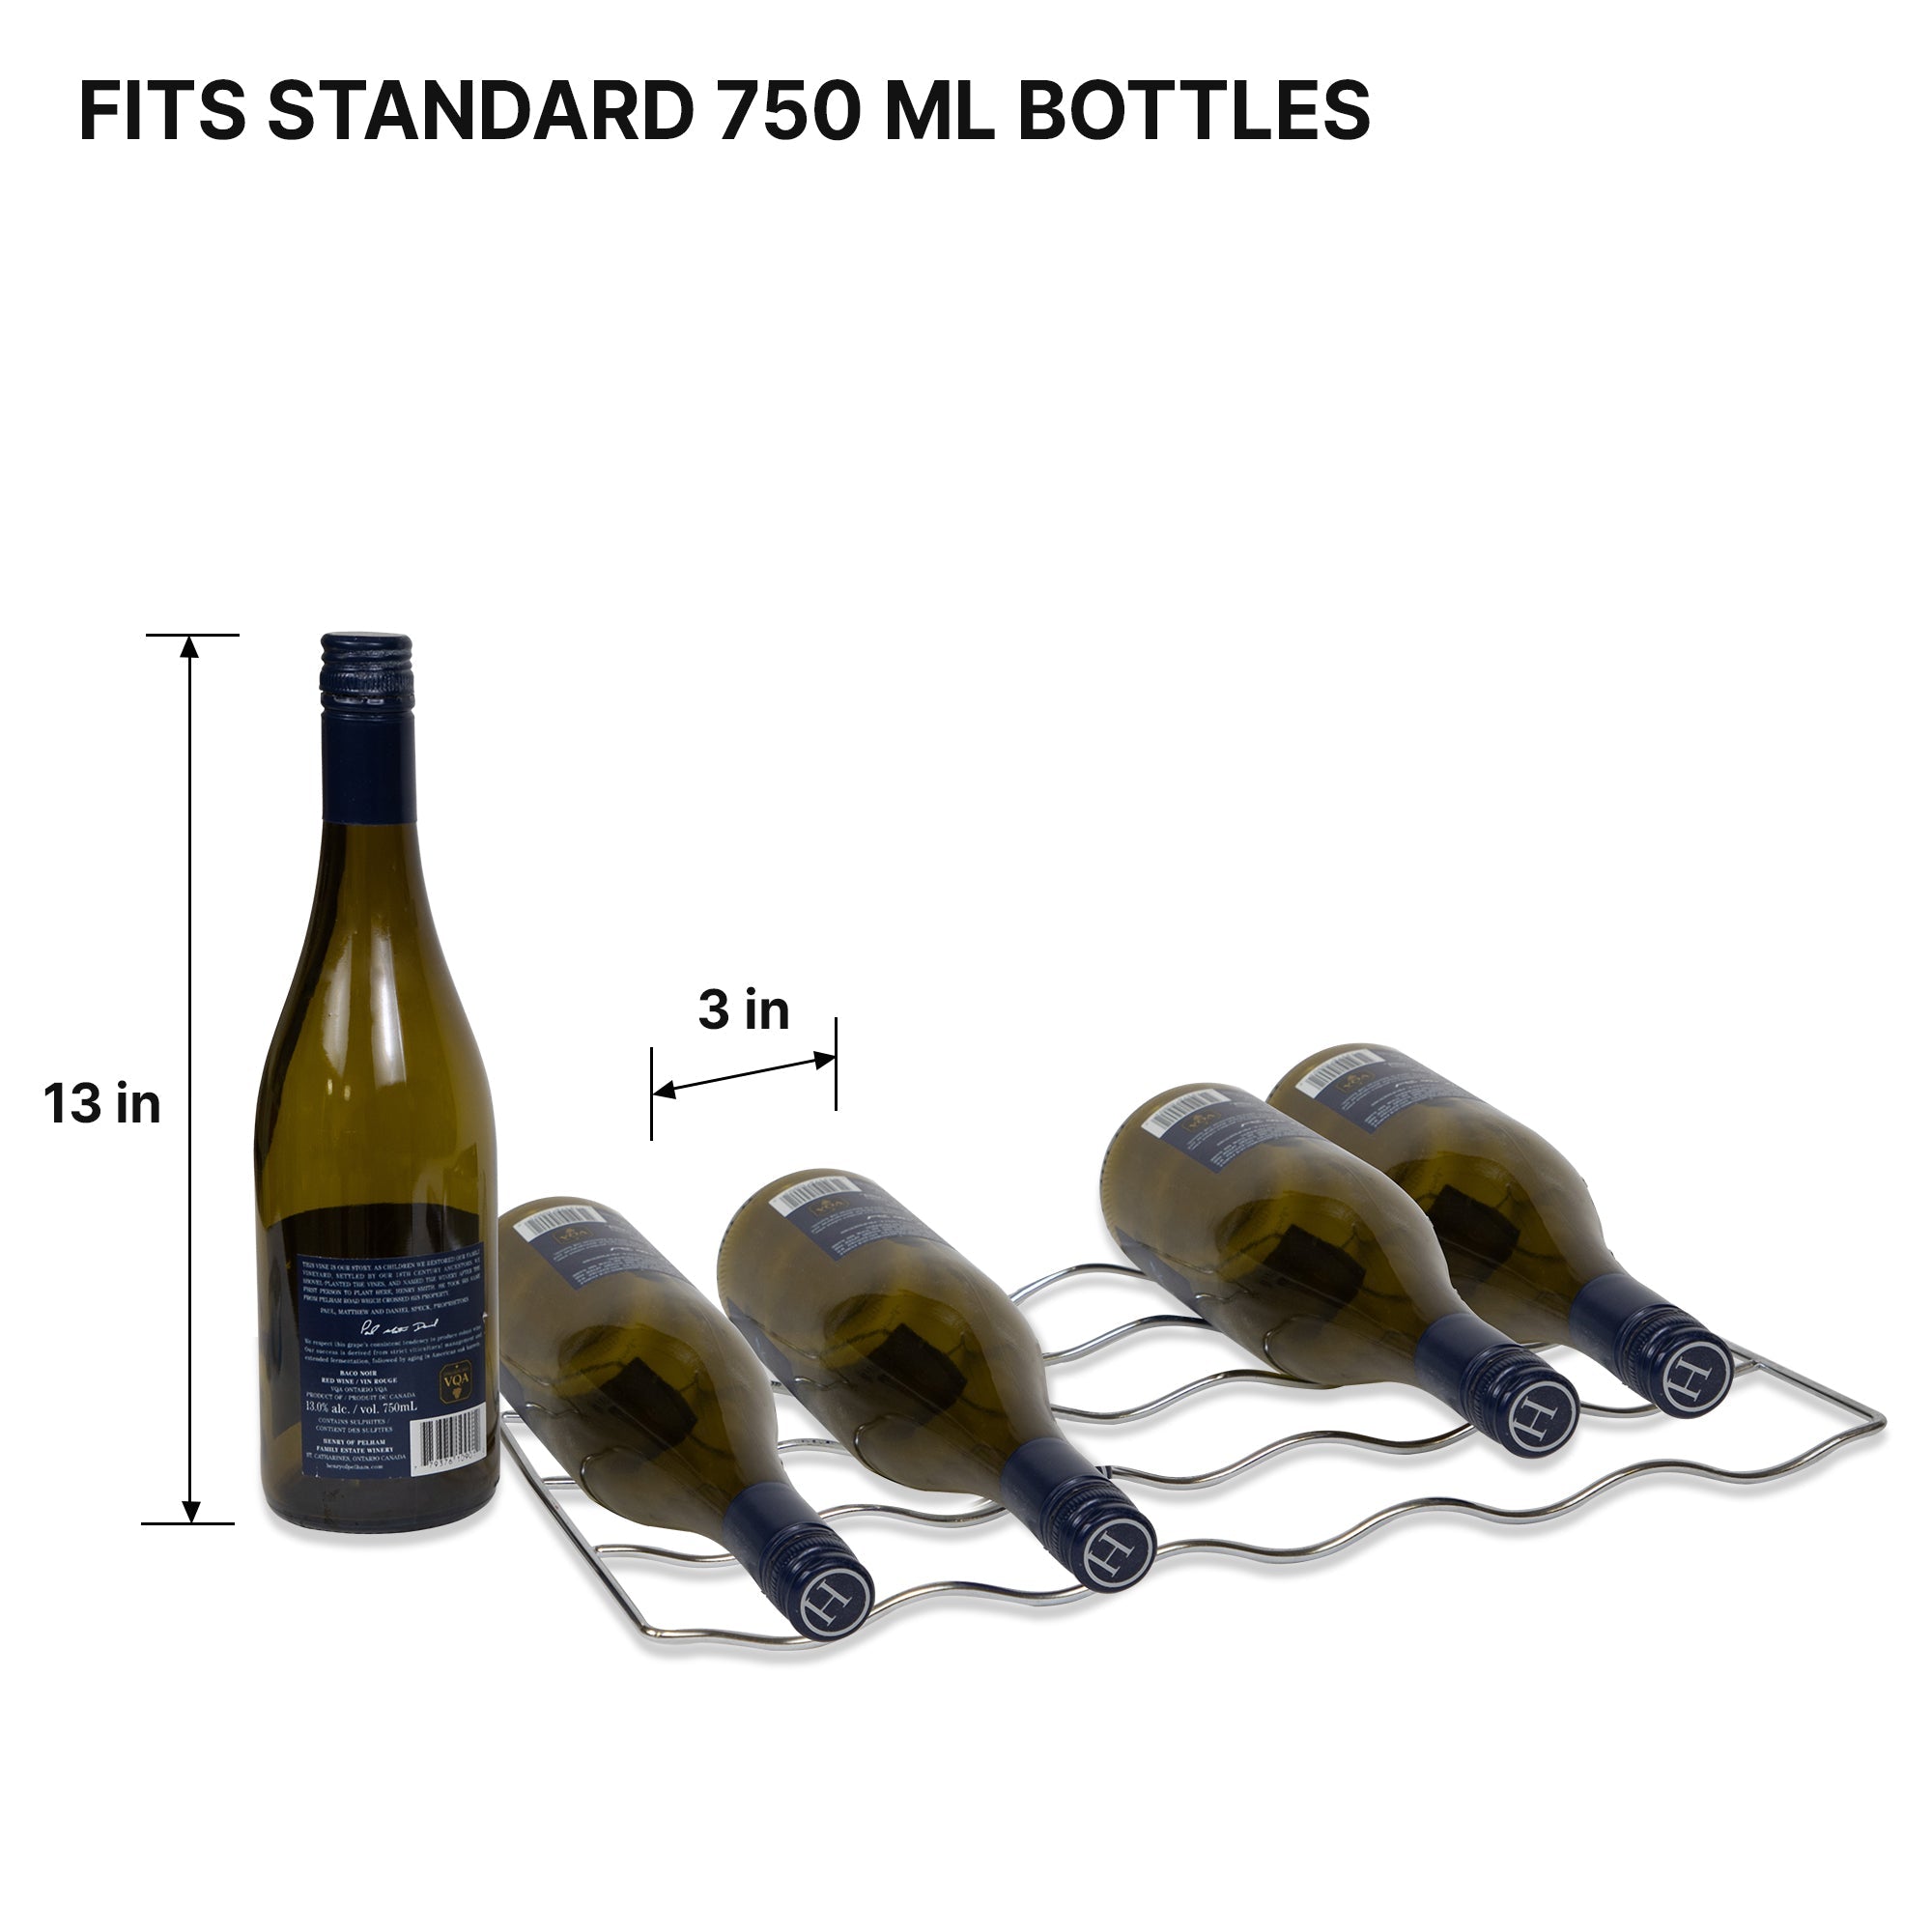 Removable wire rack from Koolatron 45 bottle wine chiller with dimensions labeled and four wine bottles lying on it and one standing up beside it. Text above reads "Fits standard 750 mL bottles"